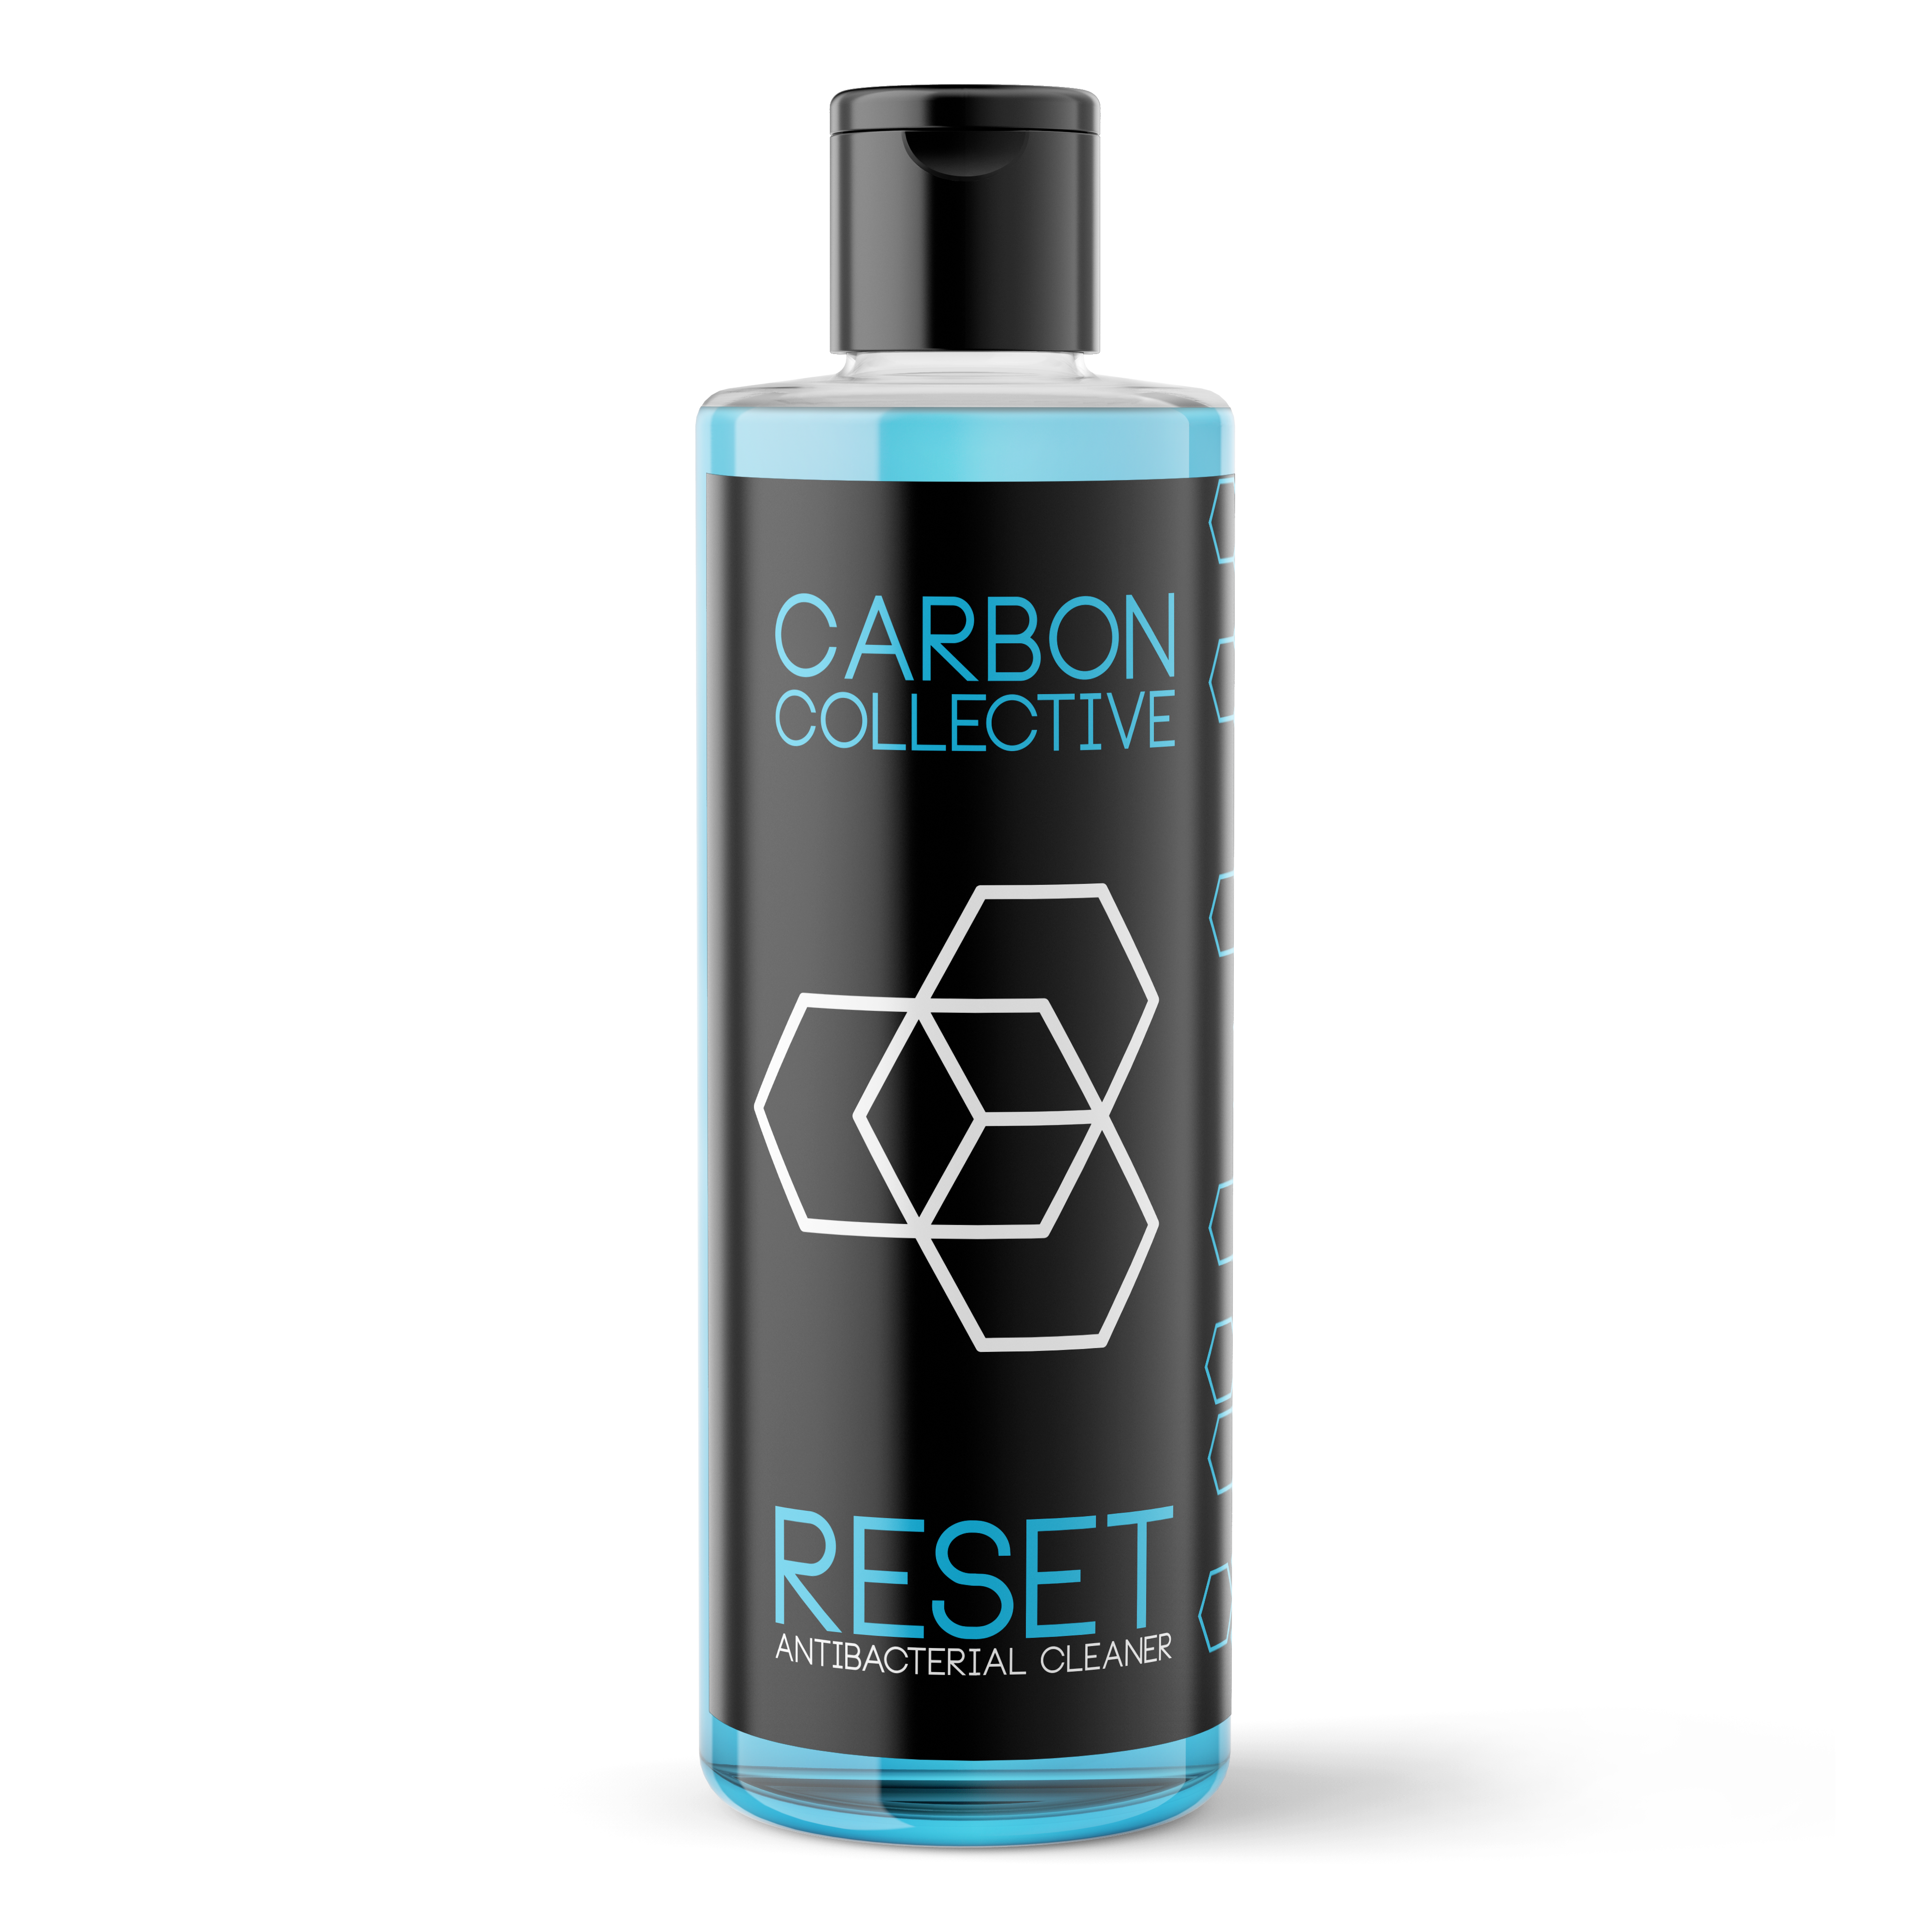 Carbon Collective Reset Anti-Bacterial Fabric Cleaner